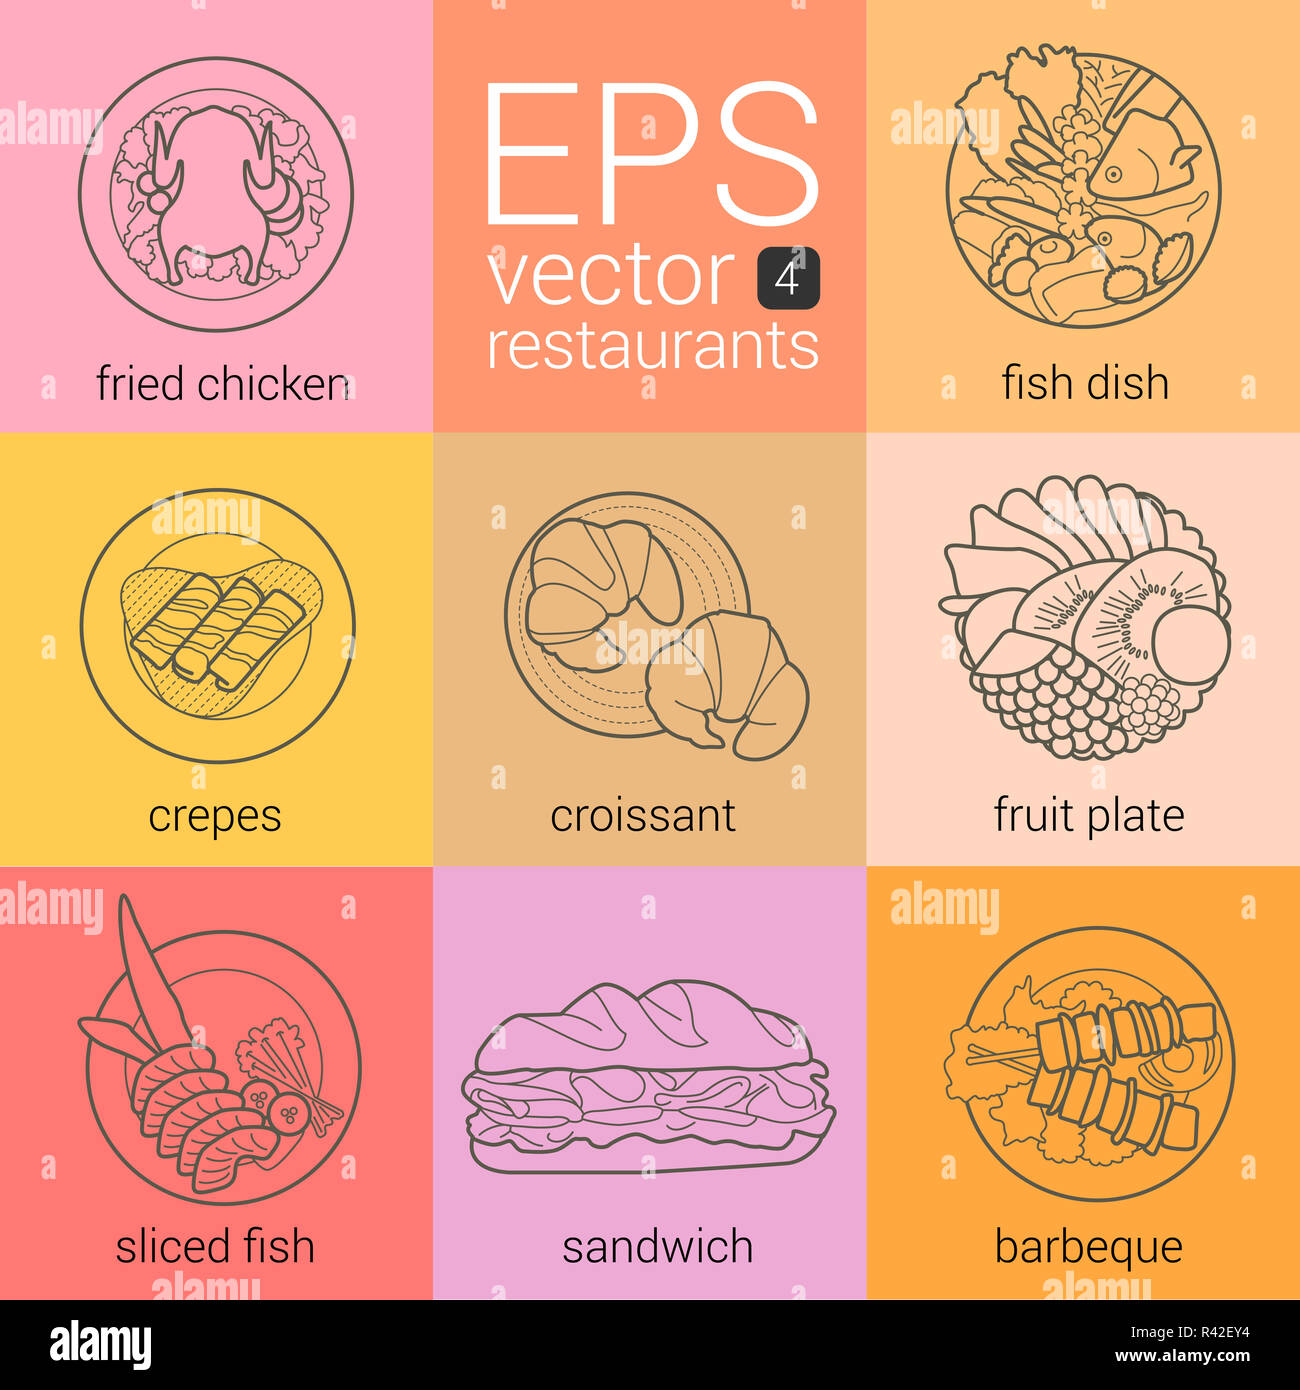 Collection of various simplified illustration vector icons for use in design of cafe, restaurant menus, website. Stock Photo